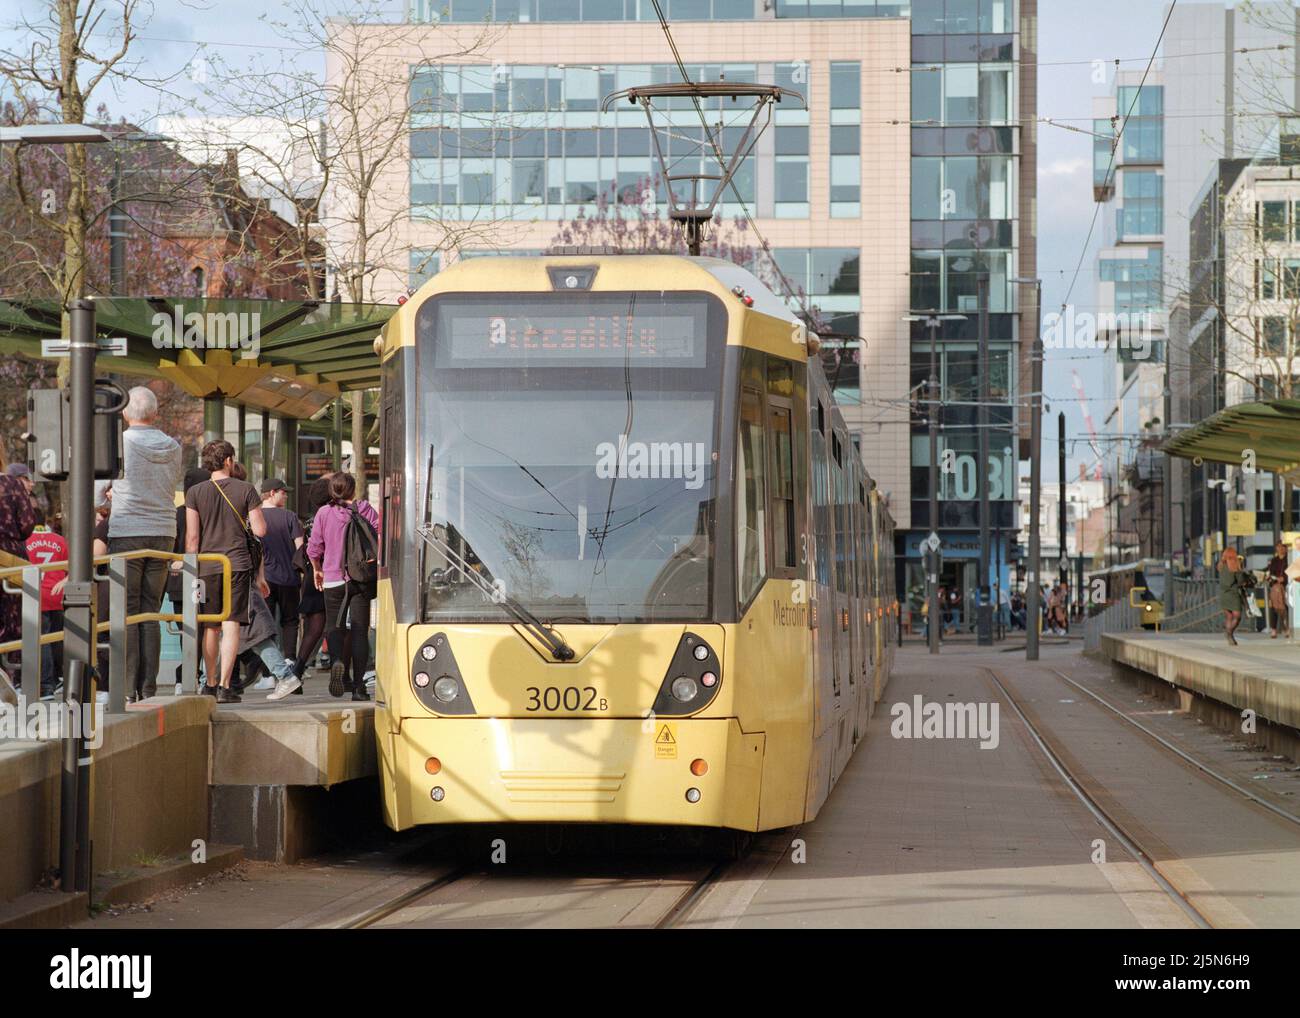 Manchester, UK - 16 April 2022: A Manchester Metrolink tram at St Peter's Square tram stop. Stock Photo